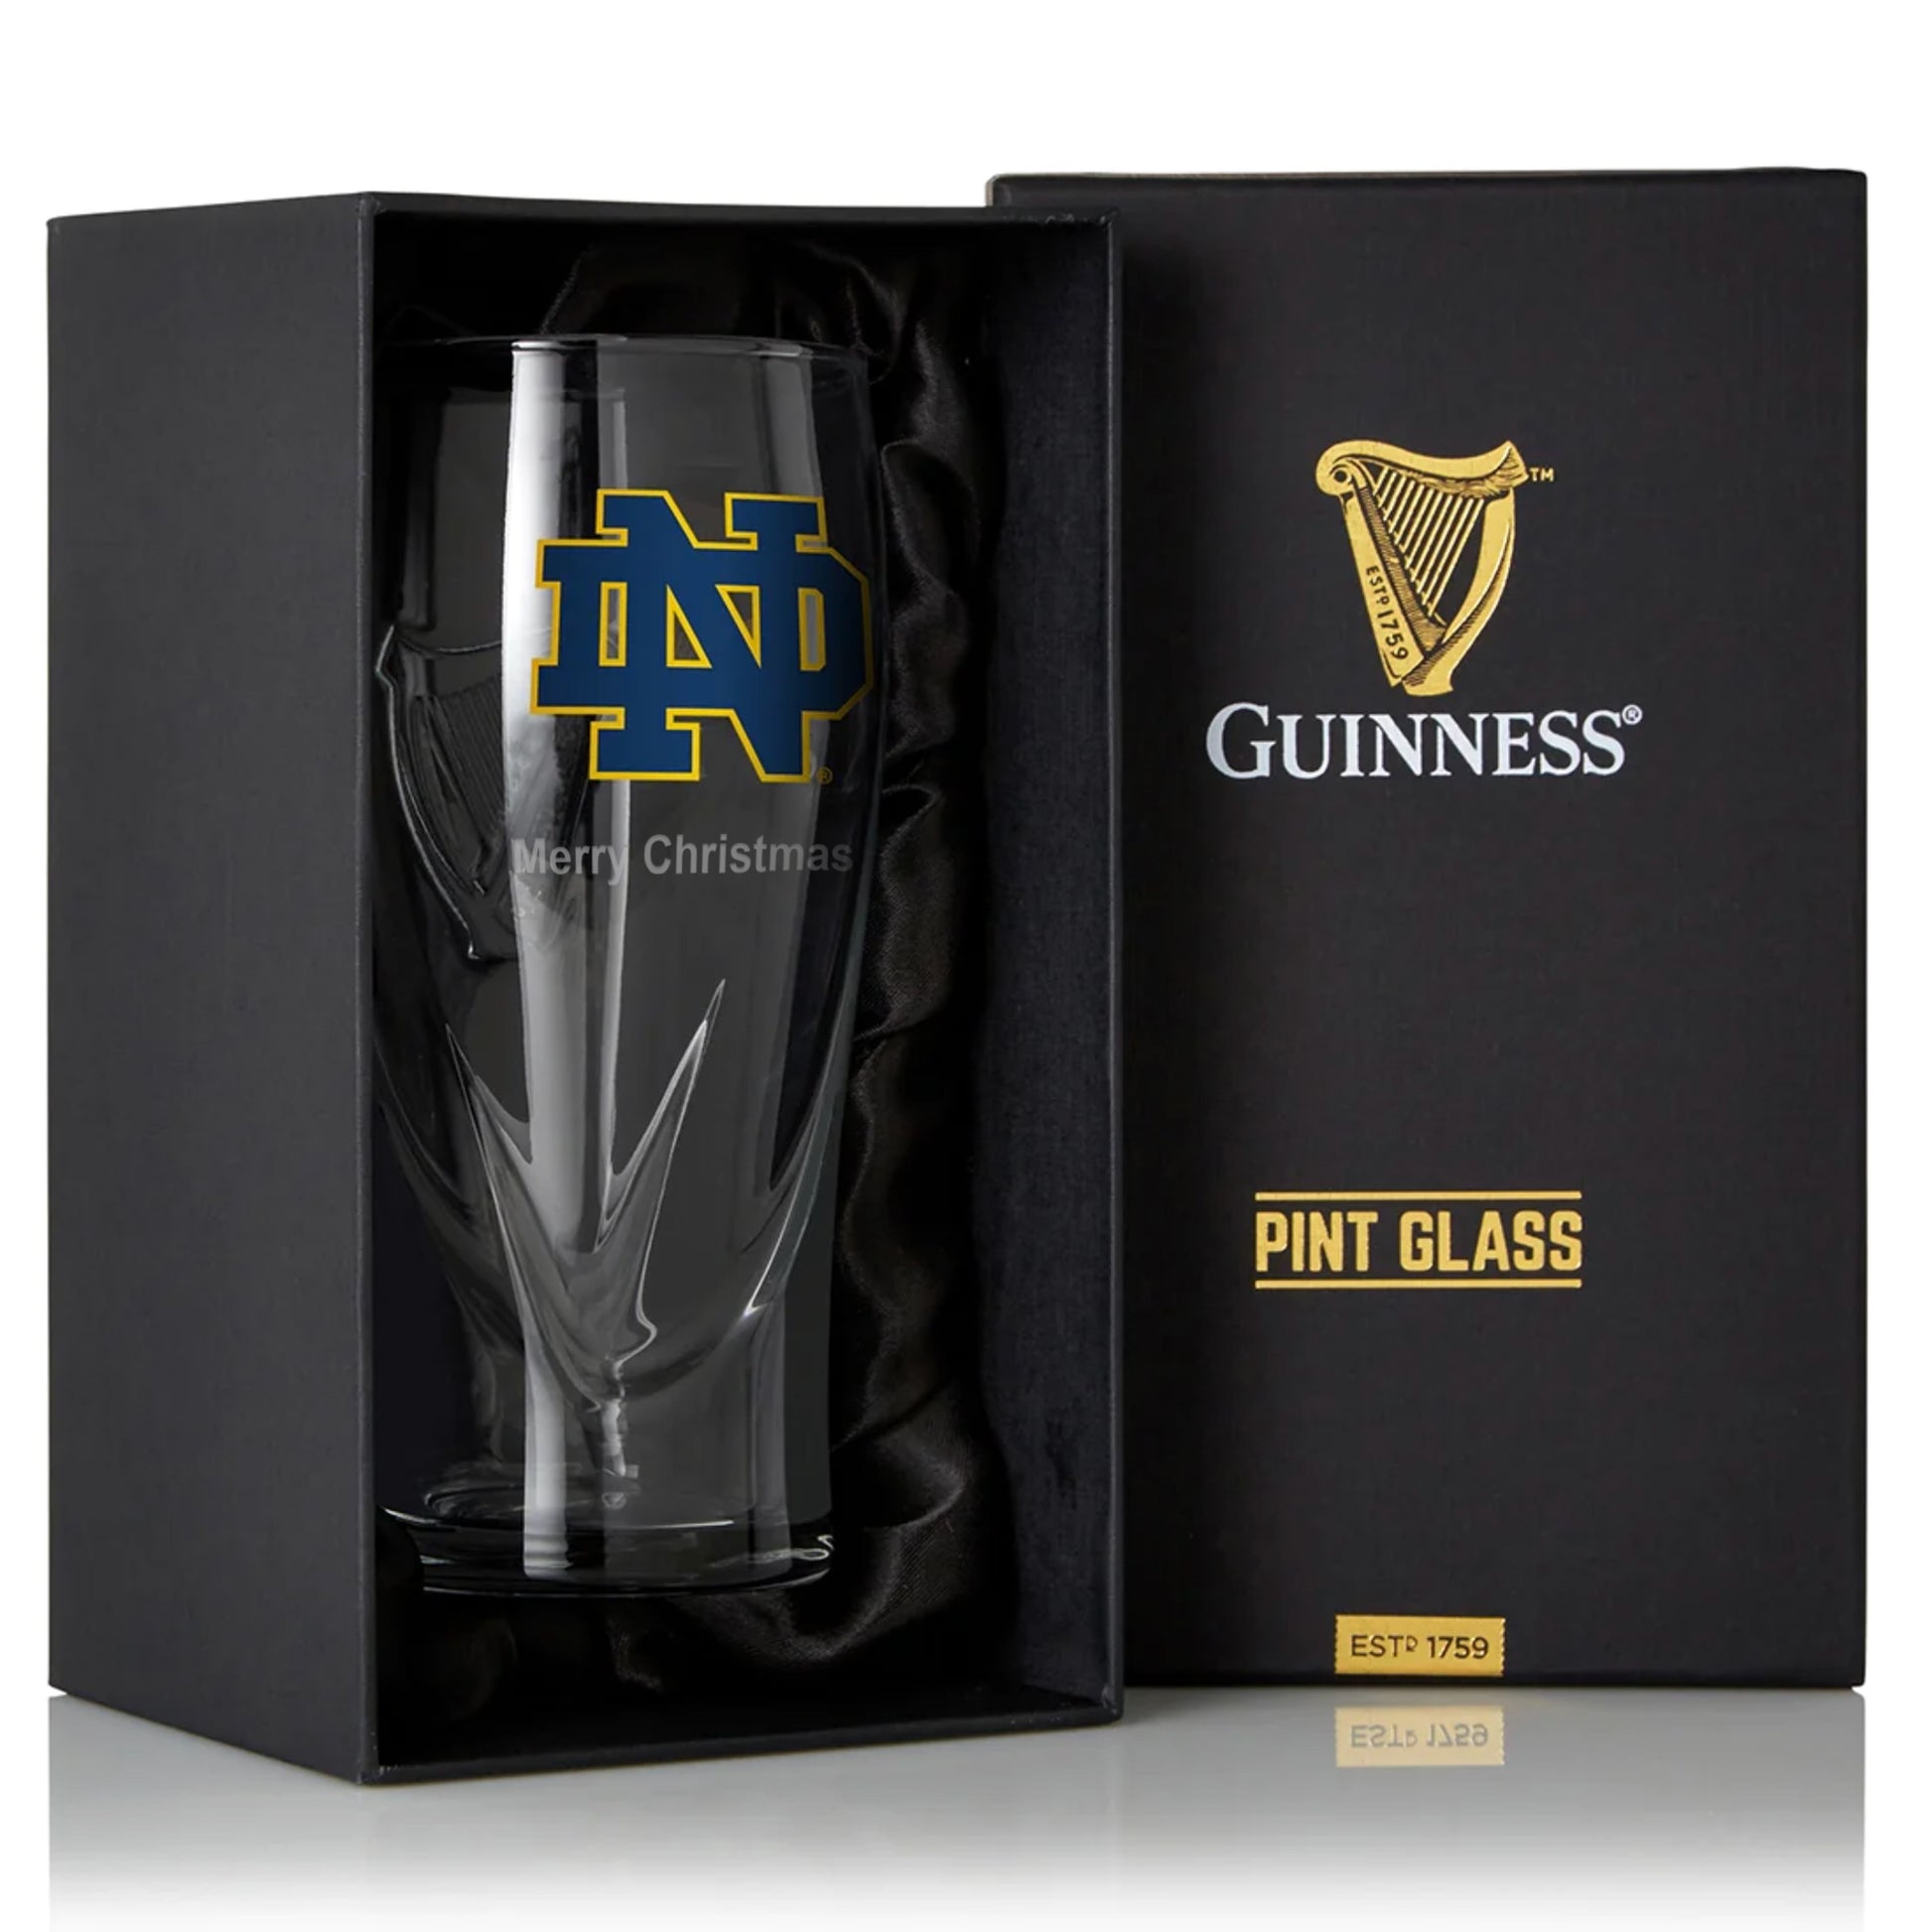 A Guinness Notre Dame 16OZ Pint Glass in a box.